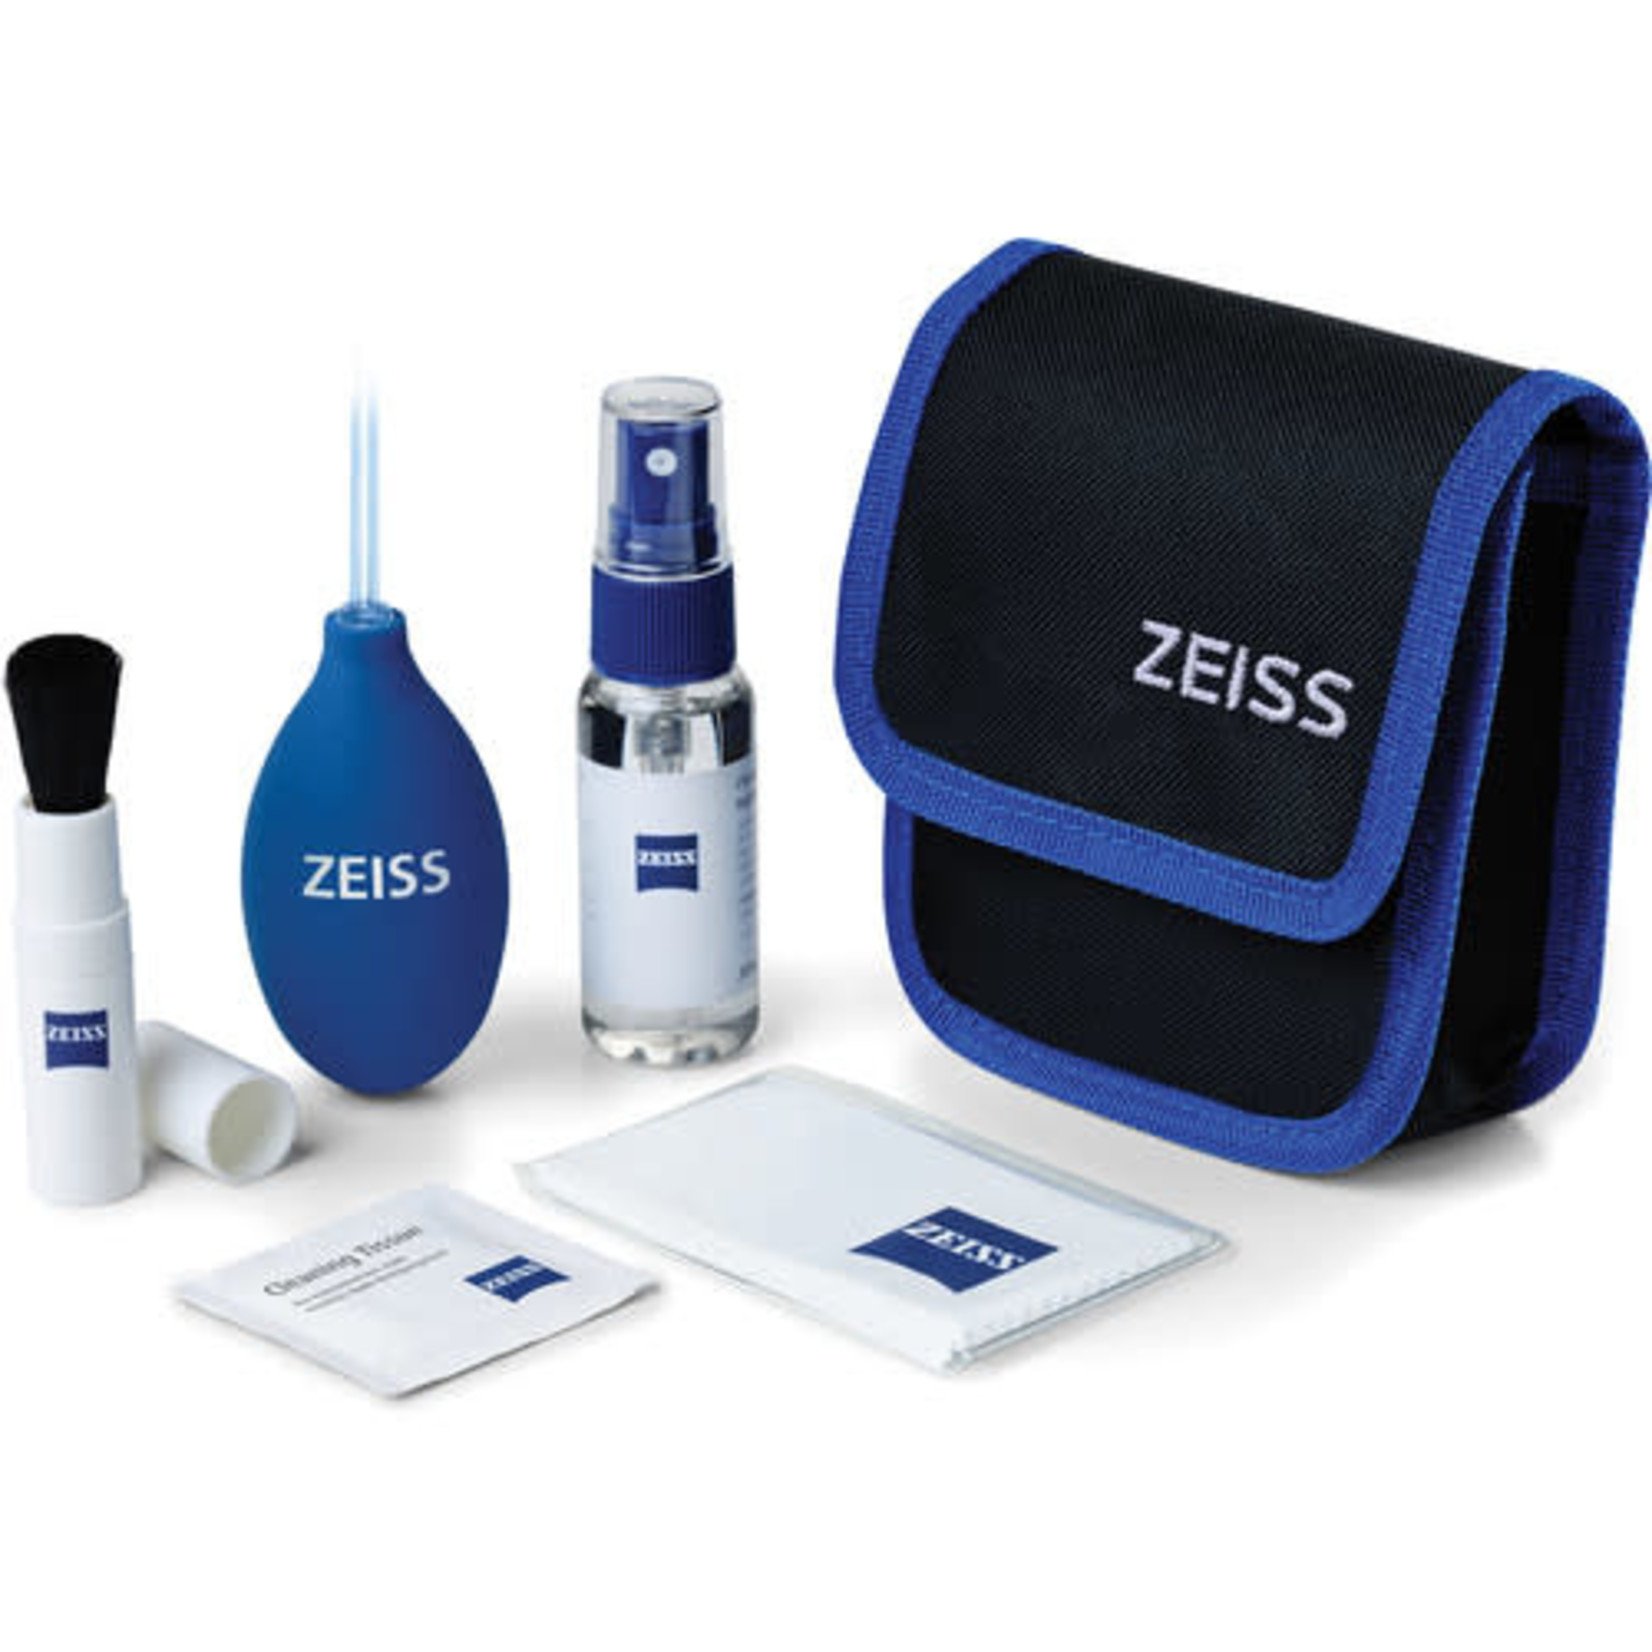 Zeiss ZEISS Lens Cleaning Kit